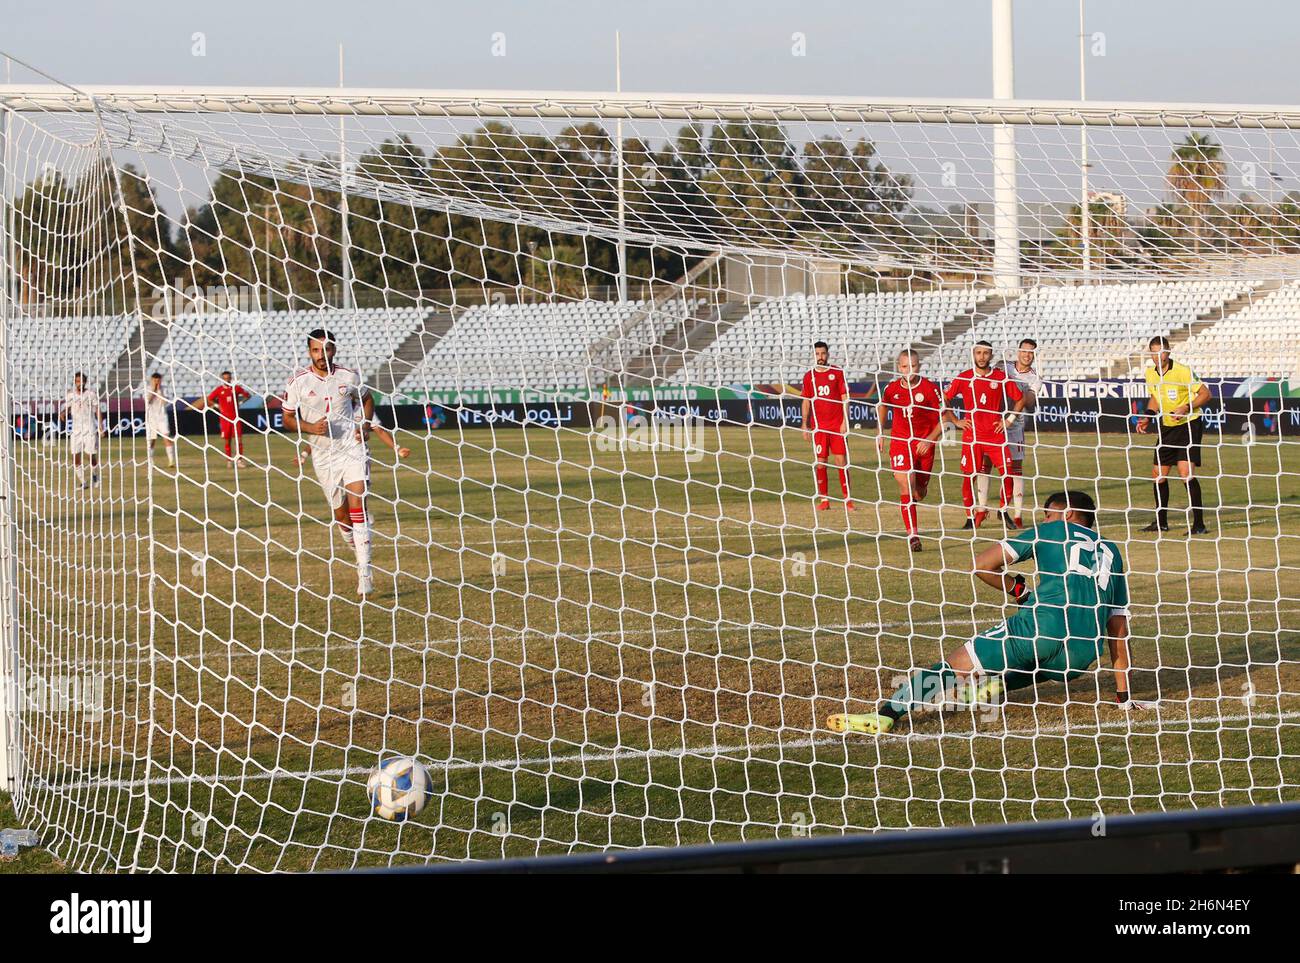 Beirut. 17th Nov, 2021. Ali Mabkhout (front 1st L) of the United Arab Emirates scores a penalty shot during the 2022 Qatar World Cup Asian Qualifiers football match between Lebanon and the United Arab Emirates at the Saida Stadium in the city of Sidon, southern Lebanon, on Nov. 16, 2021. Credit: Xinhua/Alamy Live News Stock Photo